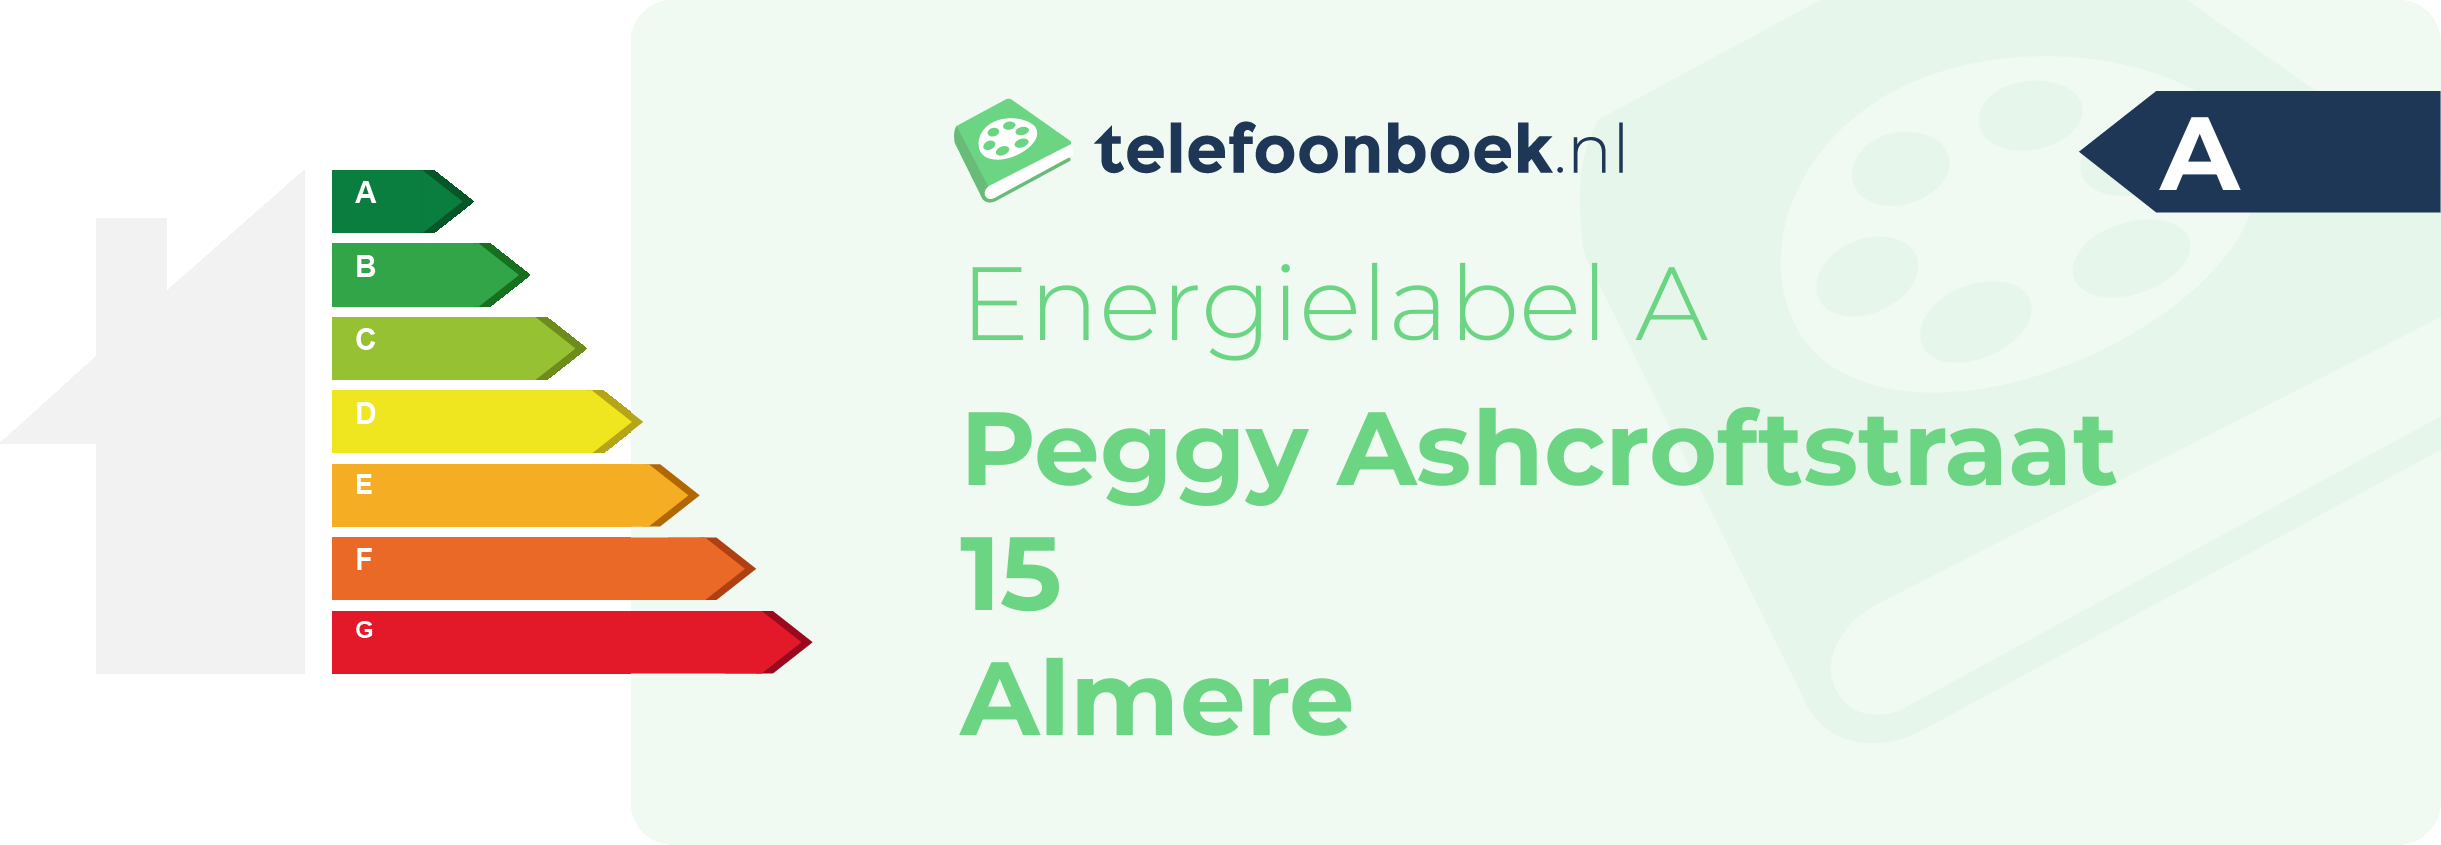 Energielabel Peggy Ashcroftstraat 15 Almere